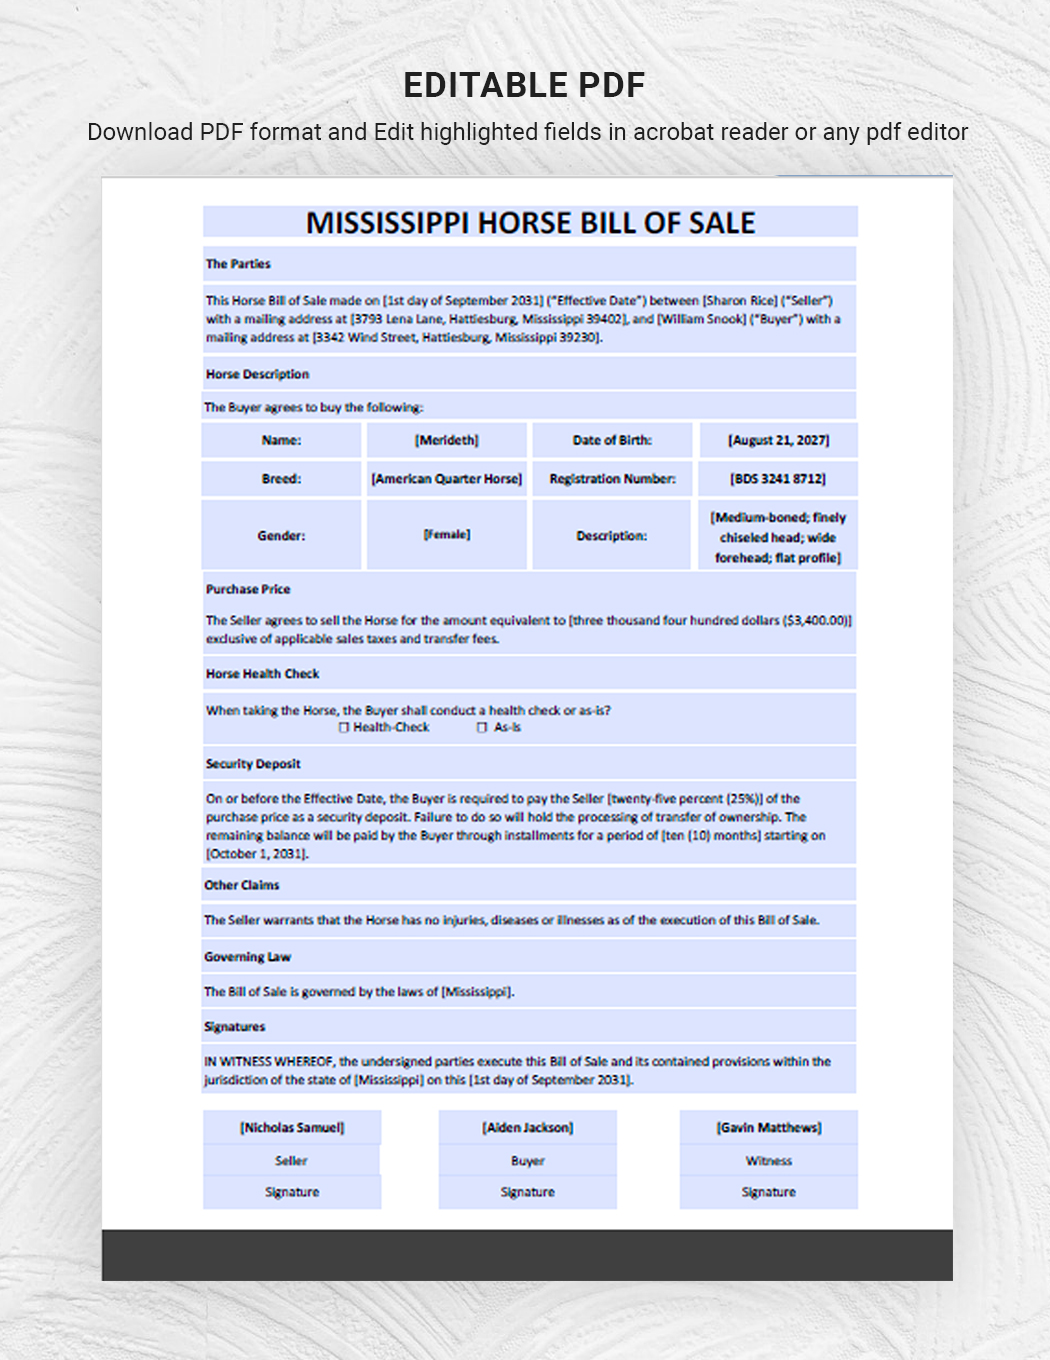 Mississippi Horse Bill of Sale Template